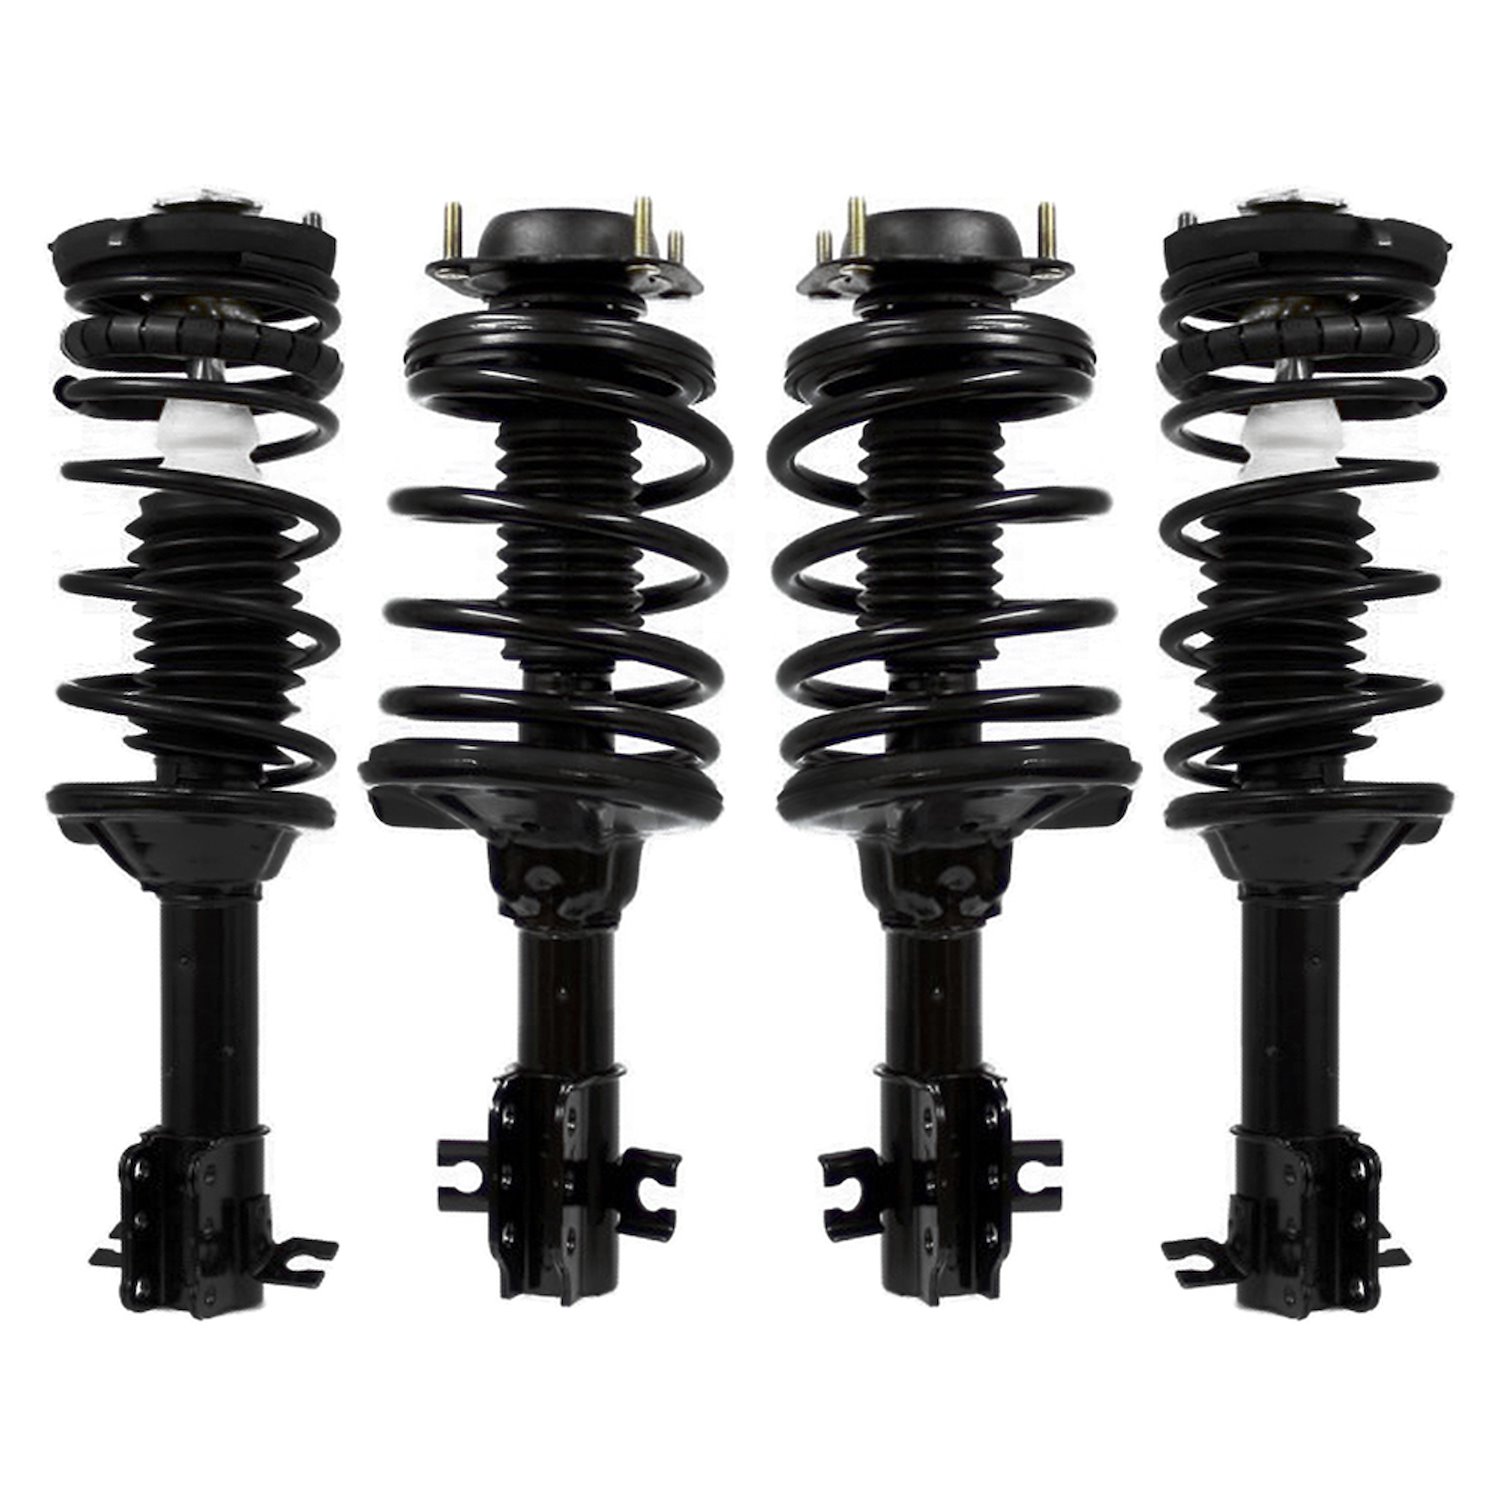 4-11120-15010-001 Front & Rear Suspension Strut & Coil Spring Assembly Kit Fits Select Ford Escort, Mercury Tracer